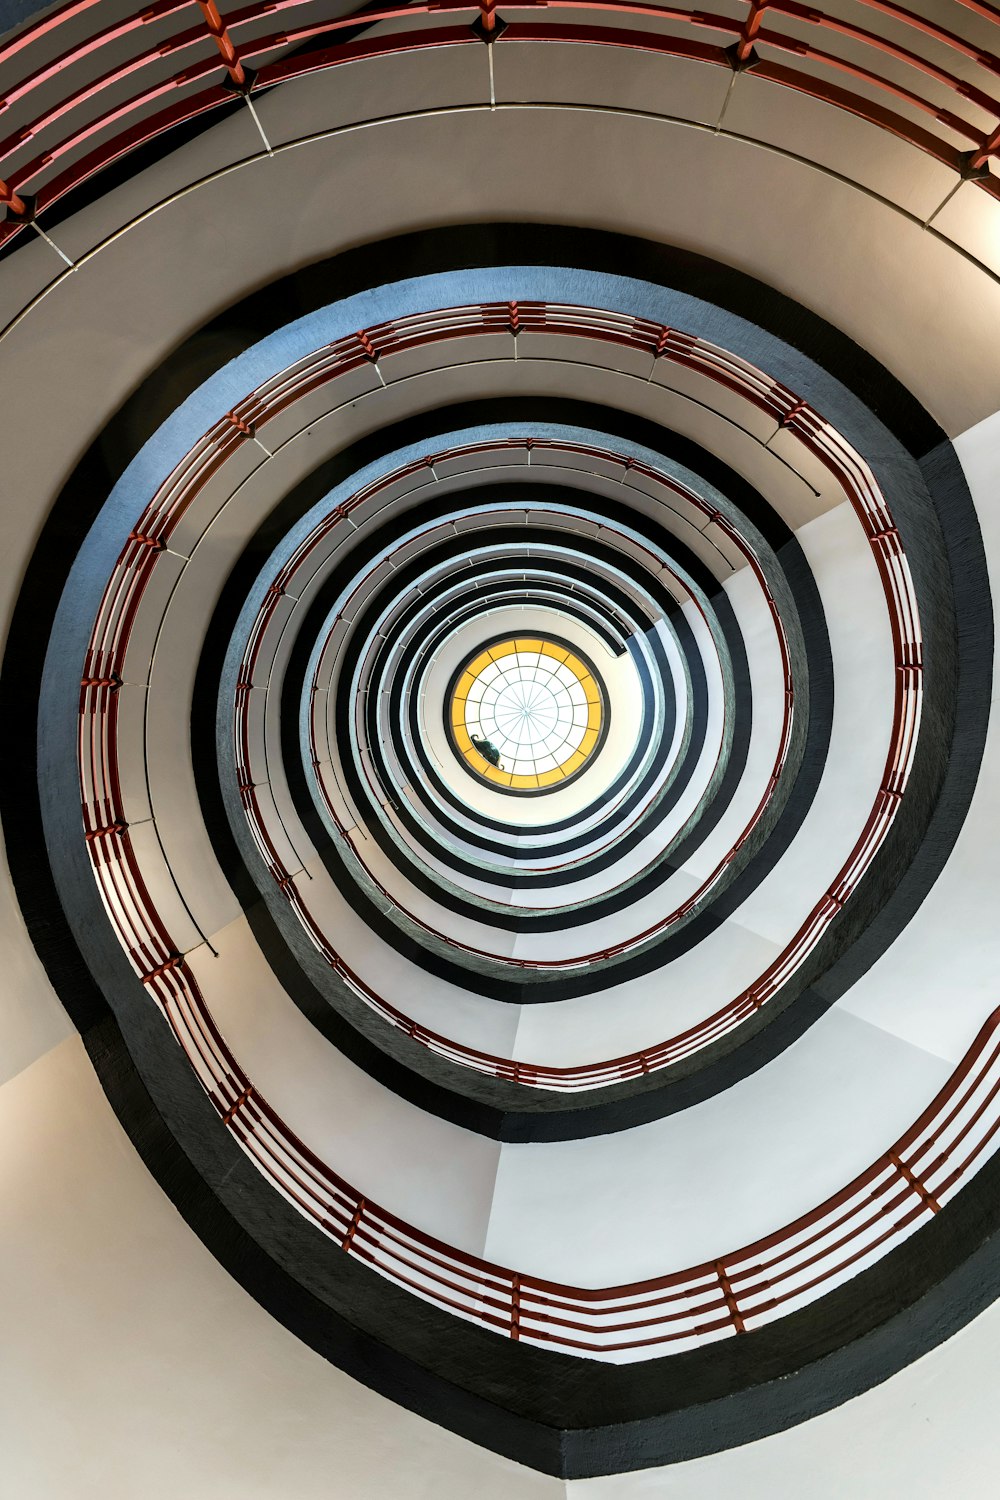 a spiral staircase with a clock in the center